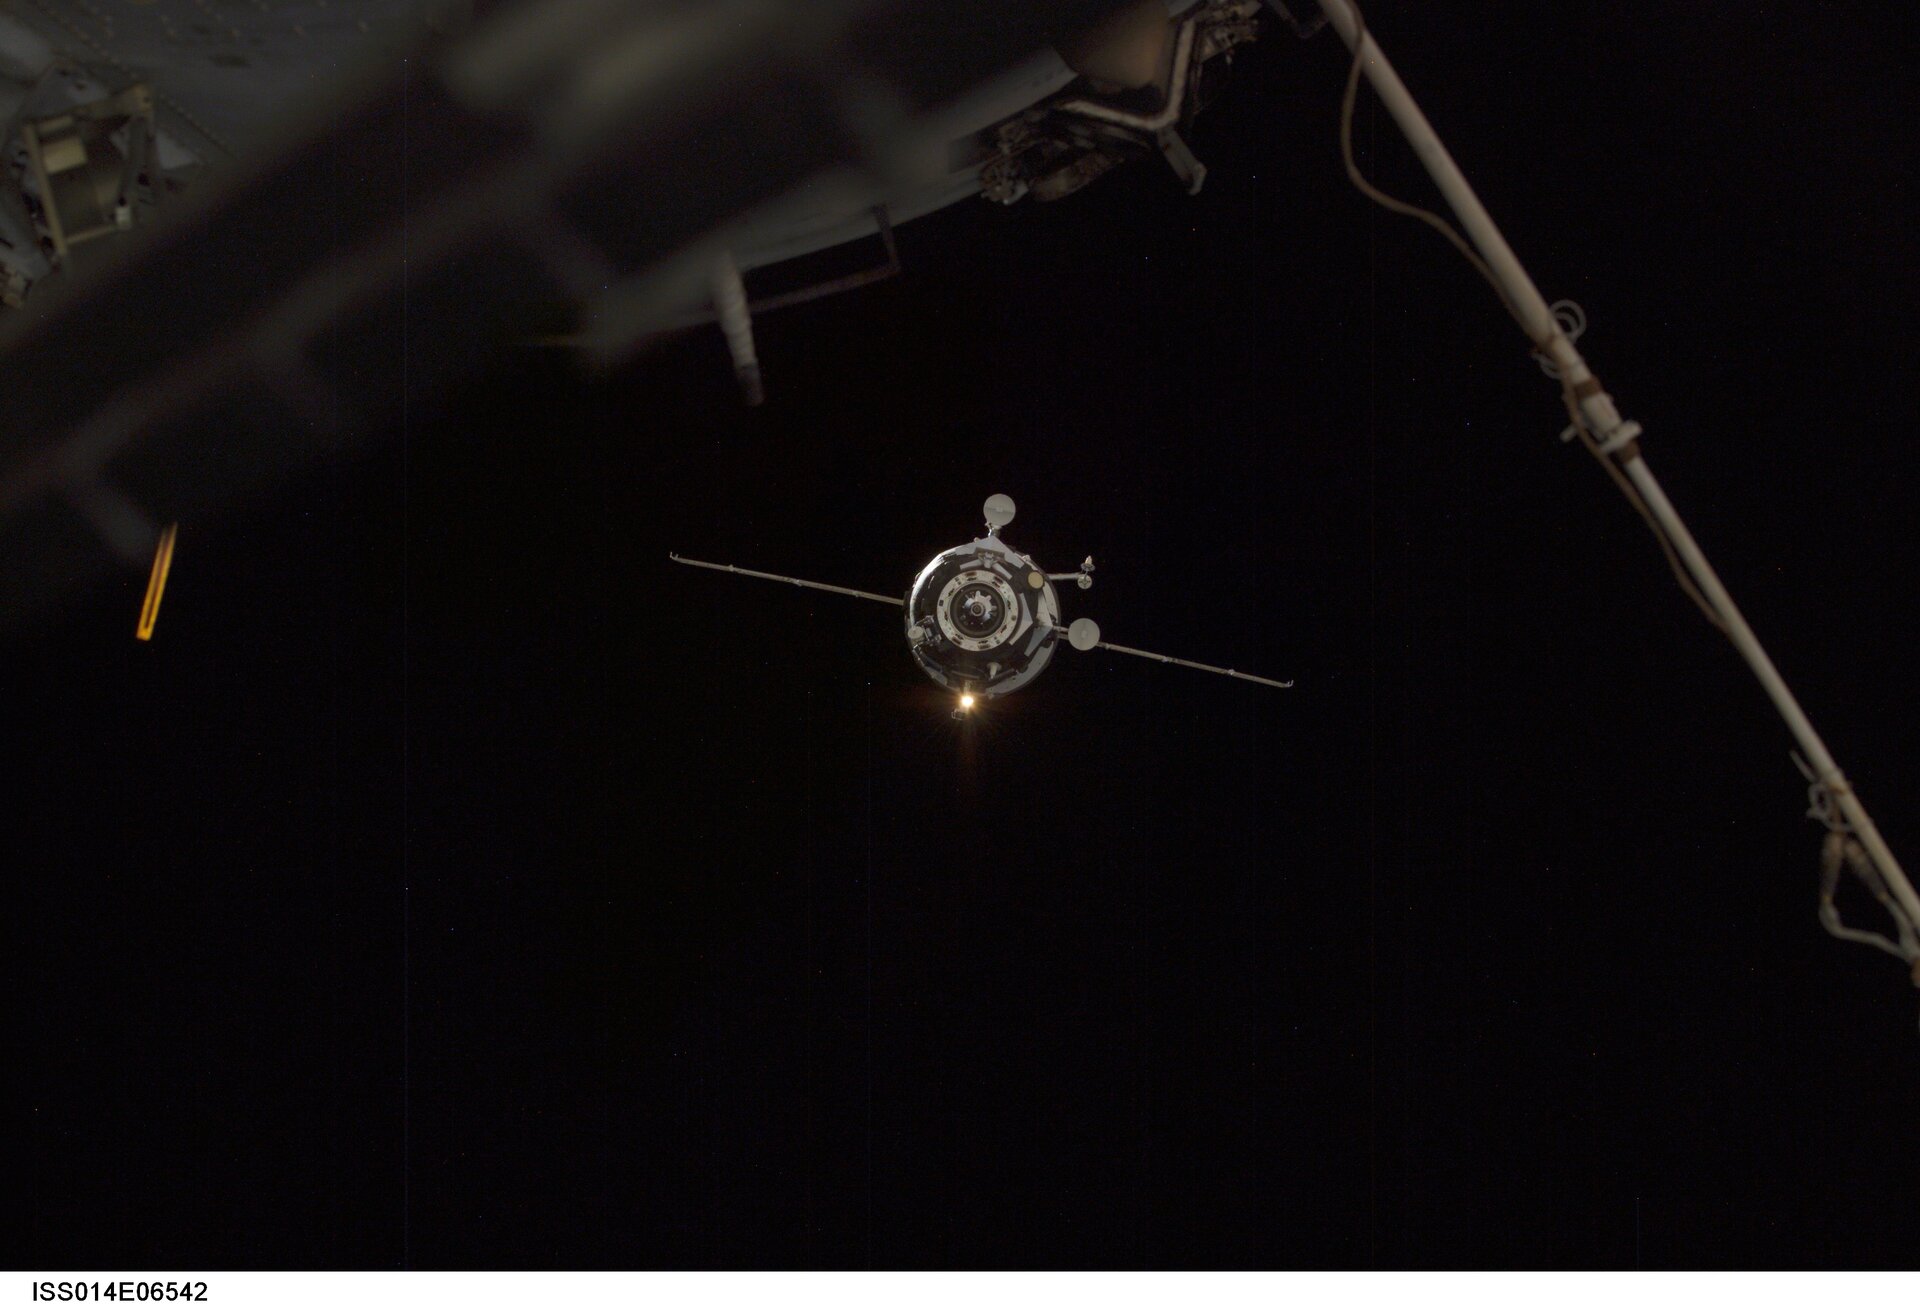 Unpiloted Progress supply vehicle approaching the ISS